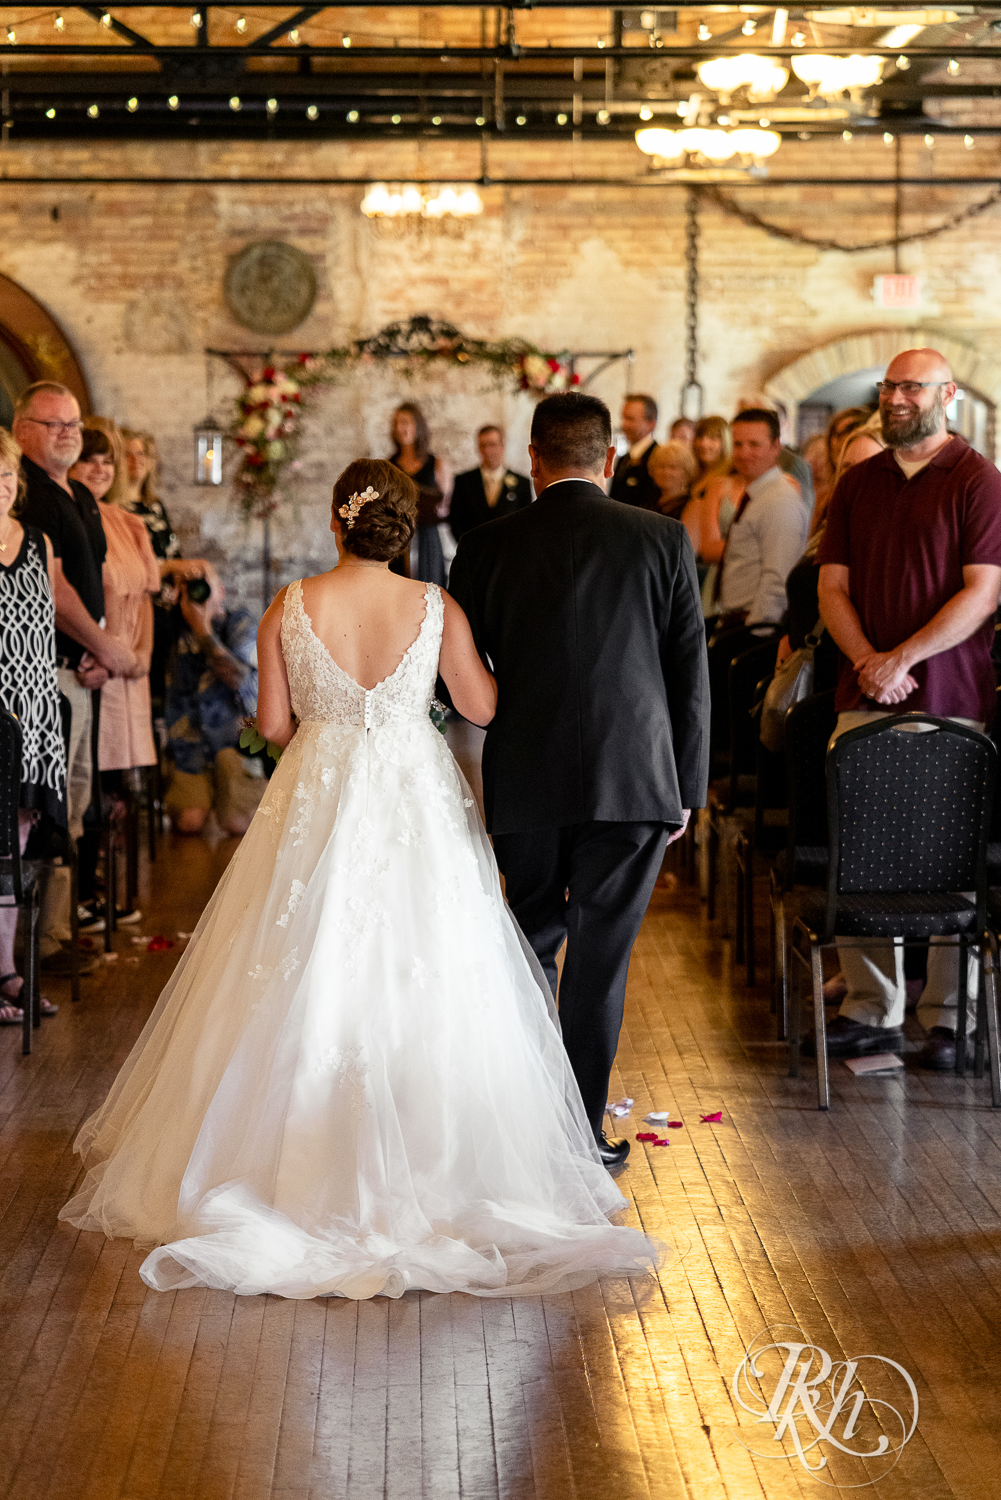 Bride walking down the aisle with her dad during wedding ceremony at Kellerman's Event Center in White Bear Lake, Minnesota.